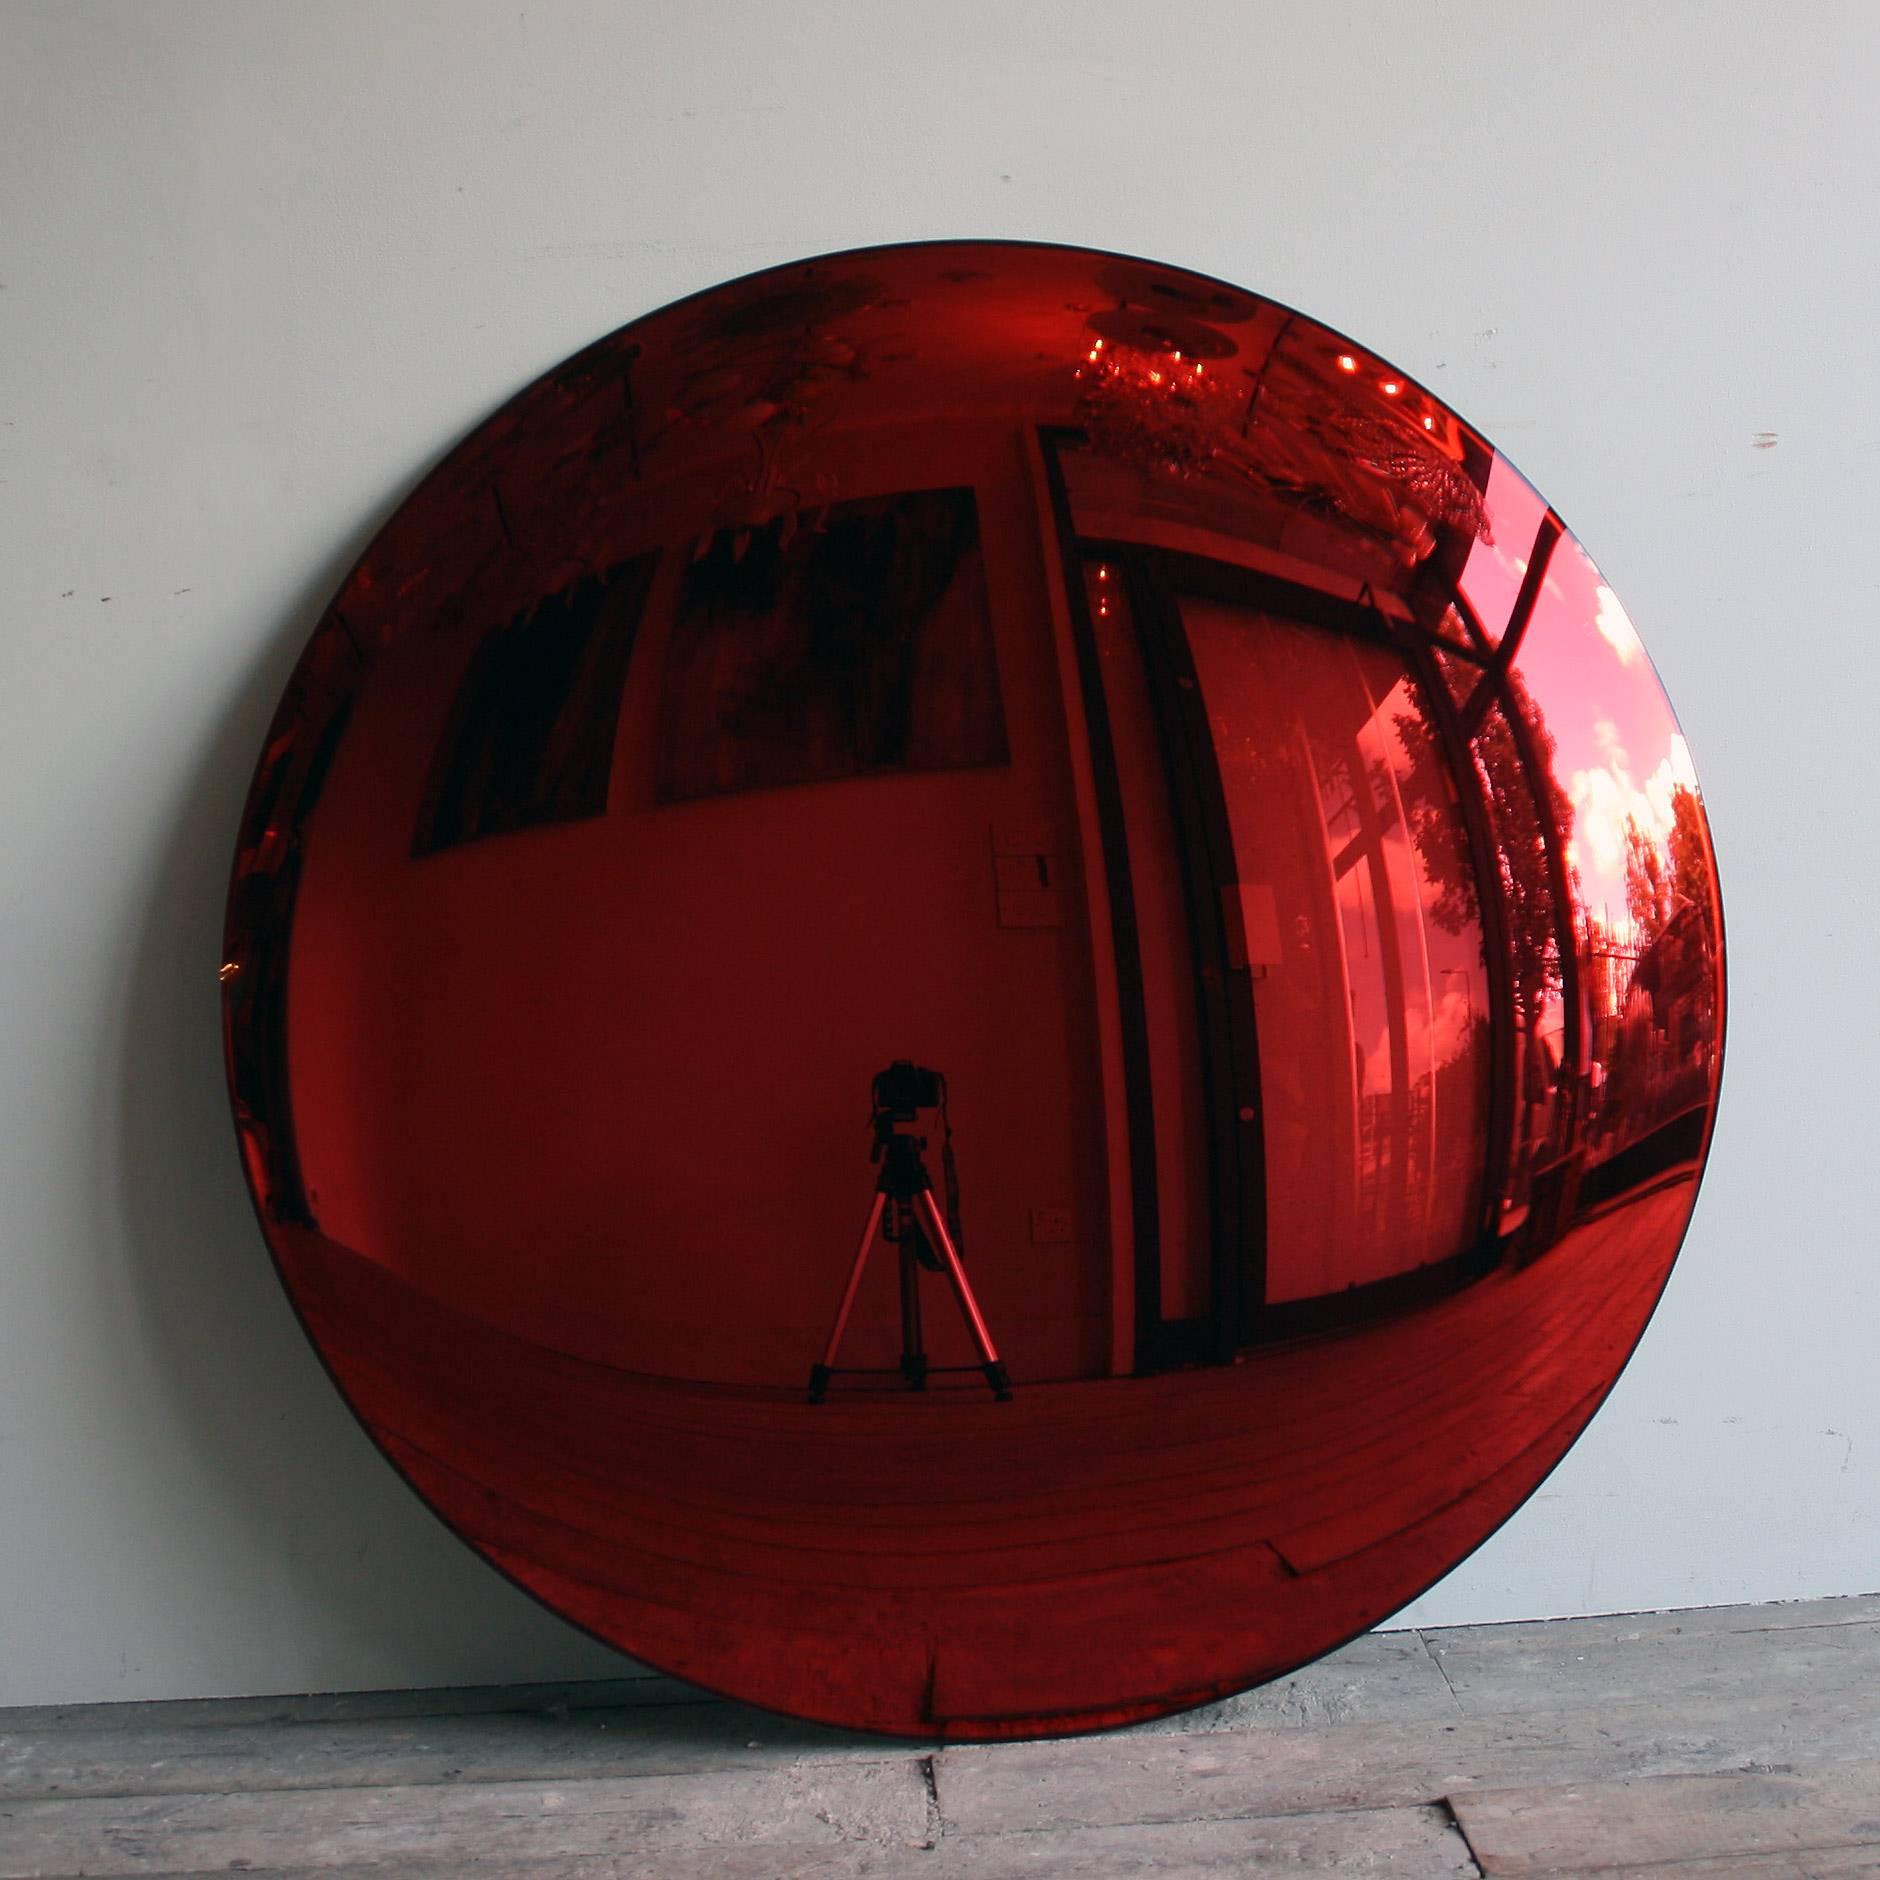 A large Red convex mirror 100cm in diameter with three bespoke clips for wall installation. A real statement piece!

All color mirrors have a two - three week lead time as all made to order.

As each mirror is bespoke made, will need a 50% deposit